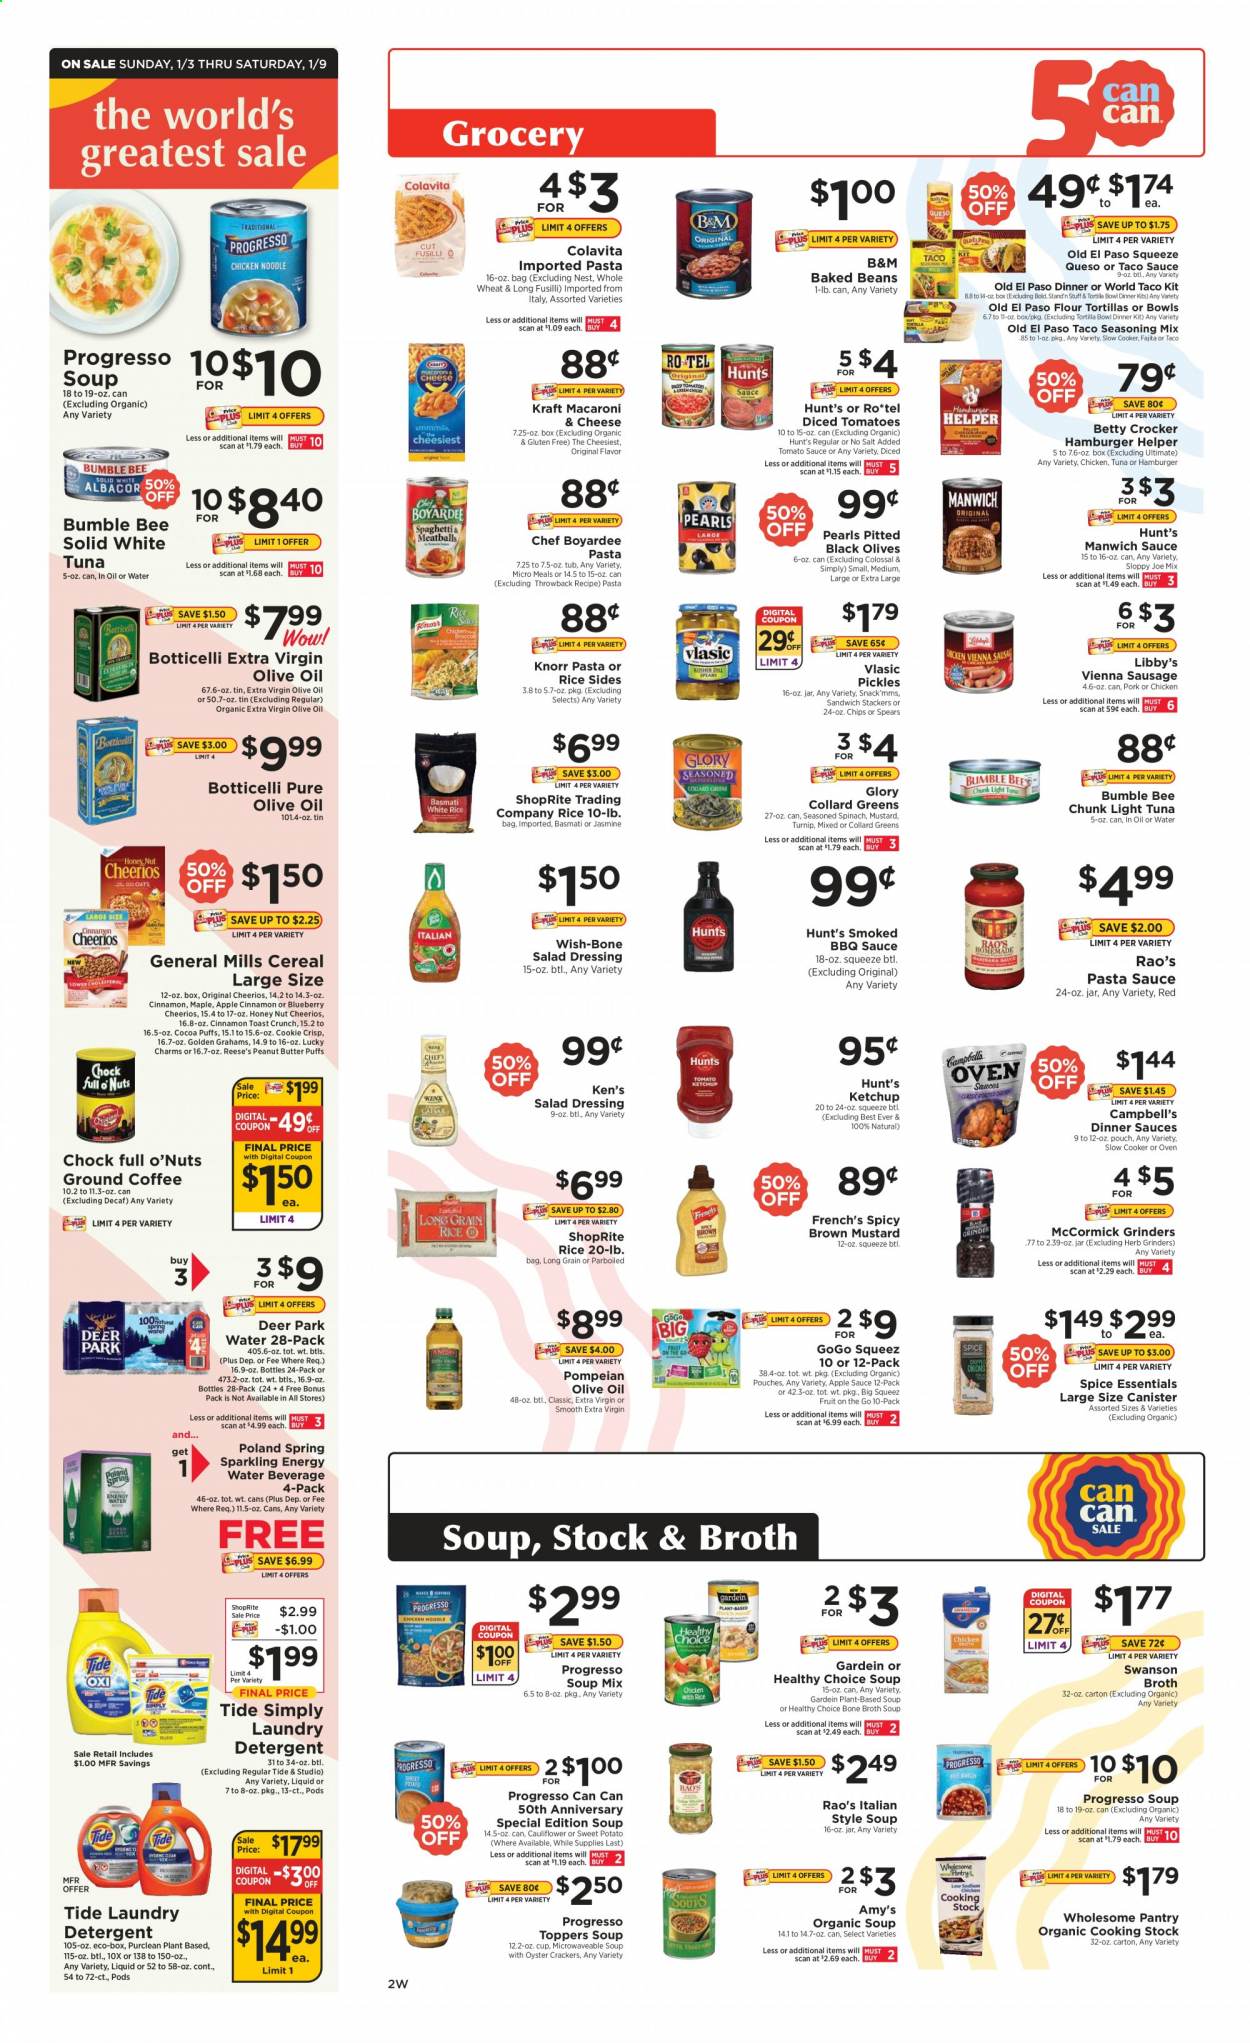 thumbnail - ShopRite Flyer - 01/03/2021 - 01/09/2021 - Sales products - tortillas, Old El Paso, toast bread, tuna, Campbell's, macaroni & cheese, sandwich, soup mix, Knorr, dinner kit, fajita, Progresso, Healthy Choice, Kraft®, sausage, vienna sausage, Reese's, beans, spinach, collard greens, sweet potato, pickles, crackers, chips, snack, oyster crackers, cocoa, broth, olives, light tuna, baked beans, Manwich, Chef Boyardee, cereals, Cheerios, basmati rice, rice, herbs, cinnamon, BBQ sauce, mustard, salad dressing, taco sauce, tomato sauce, ketchup, pasta sauce, dressing, extra virgin olive oil, olive oil, apple sauce, peanut butter, detergent, Tide, laundry detergent, canister, cup, bowl. Page 2.